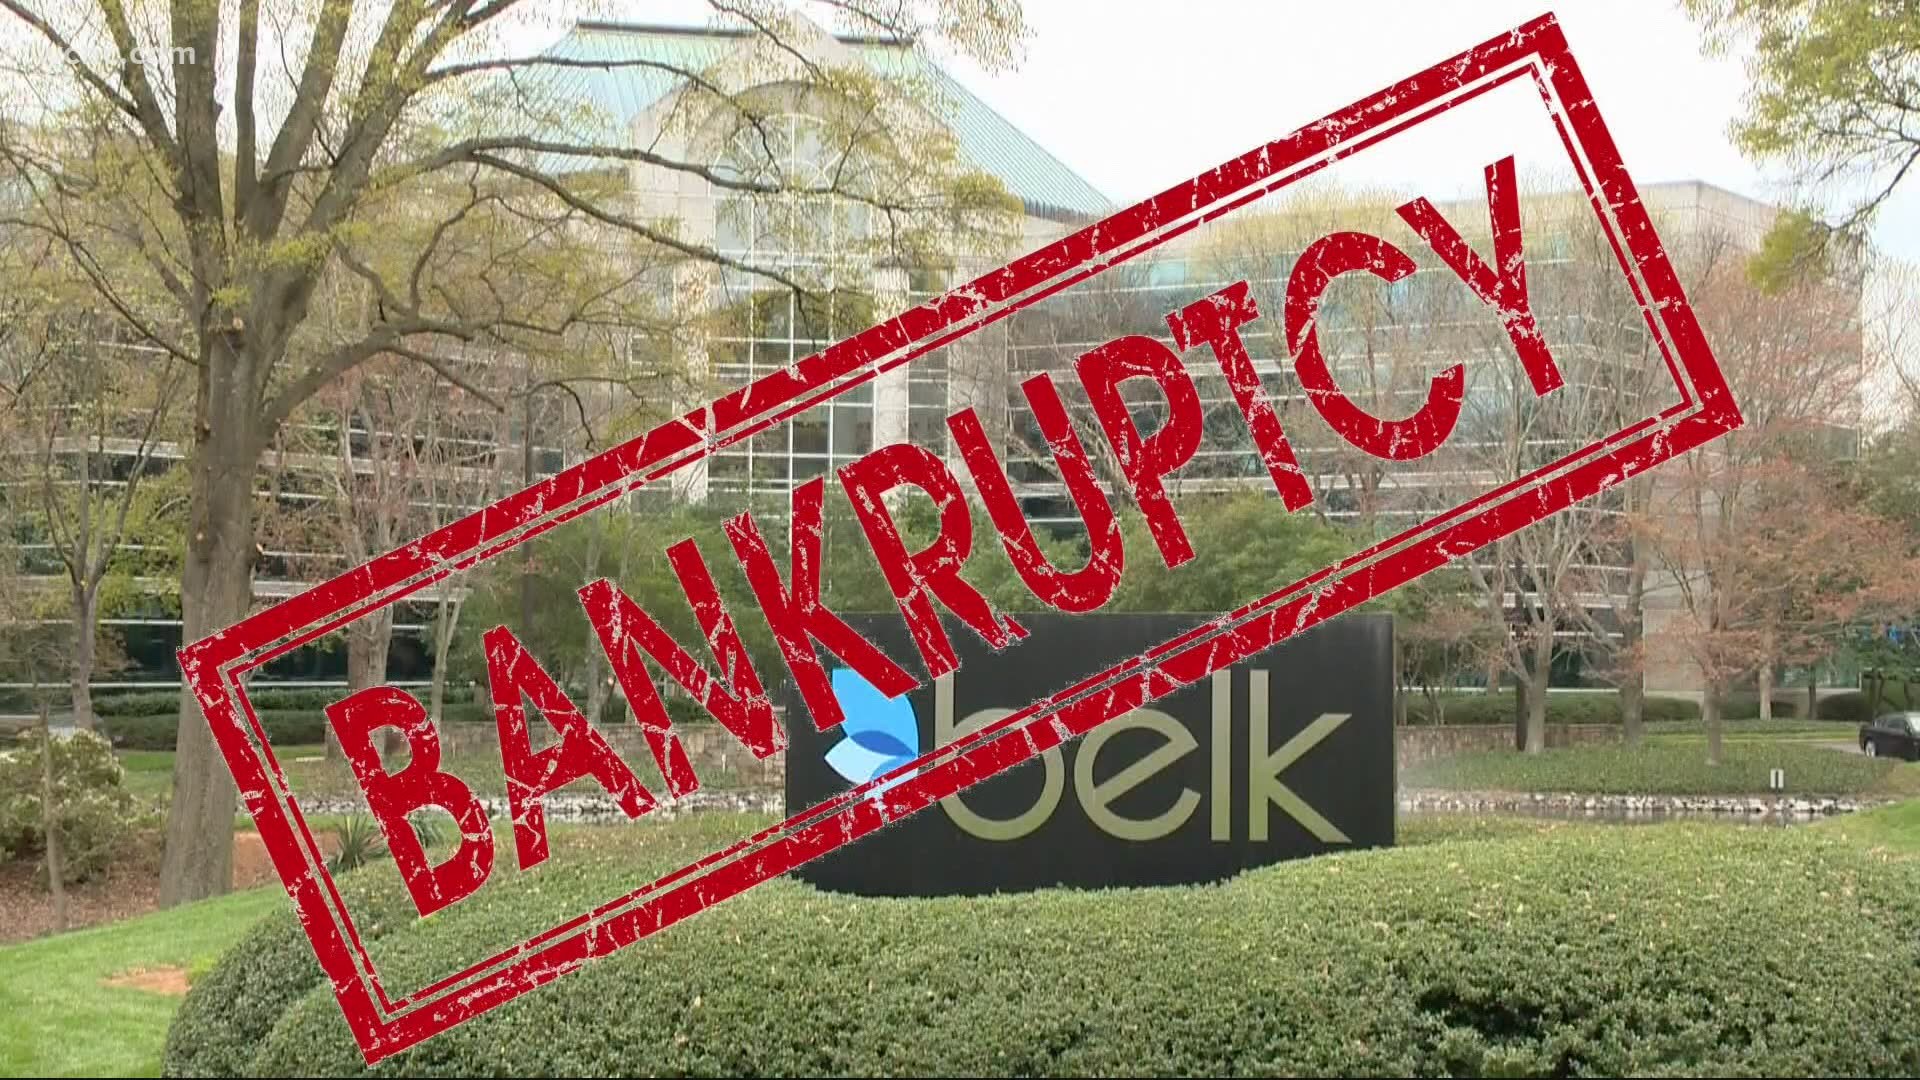 Belk has been given a lifeline but is it enough to keep it alive?